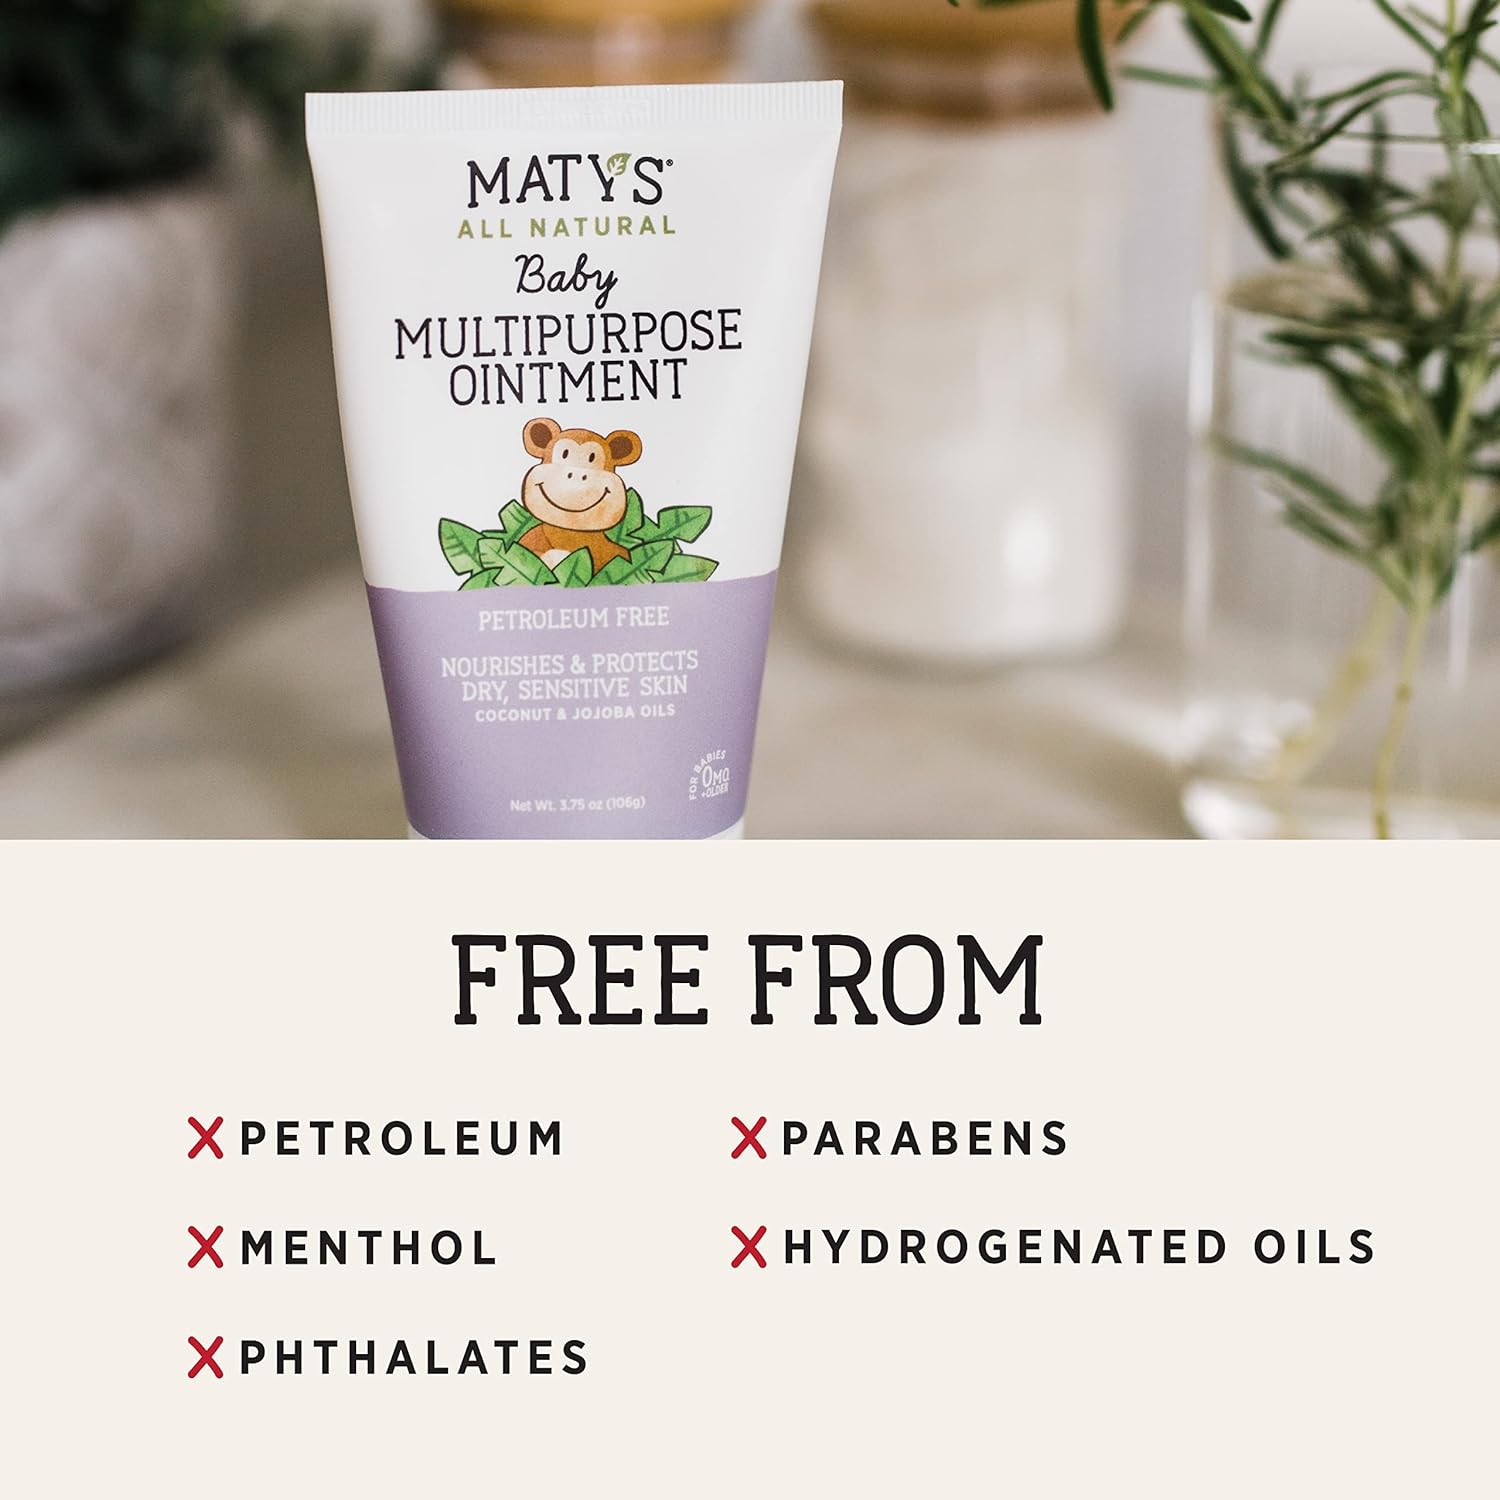 Matys Multipurpose Baby Ointment, All Over Gentle Skin Protection for Newborns & Up, Soothes Dry Irritated Skin, Diaper Rash, Cradle Cap, Drool Rash & More, Petroleum Free, 2 Pack, 3.75 oz each tube : Baby